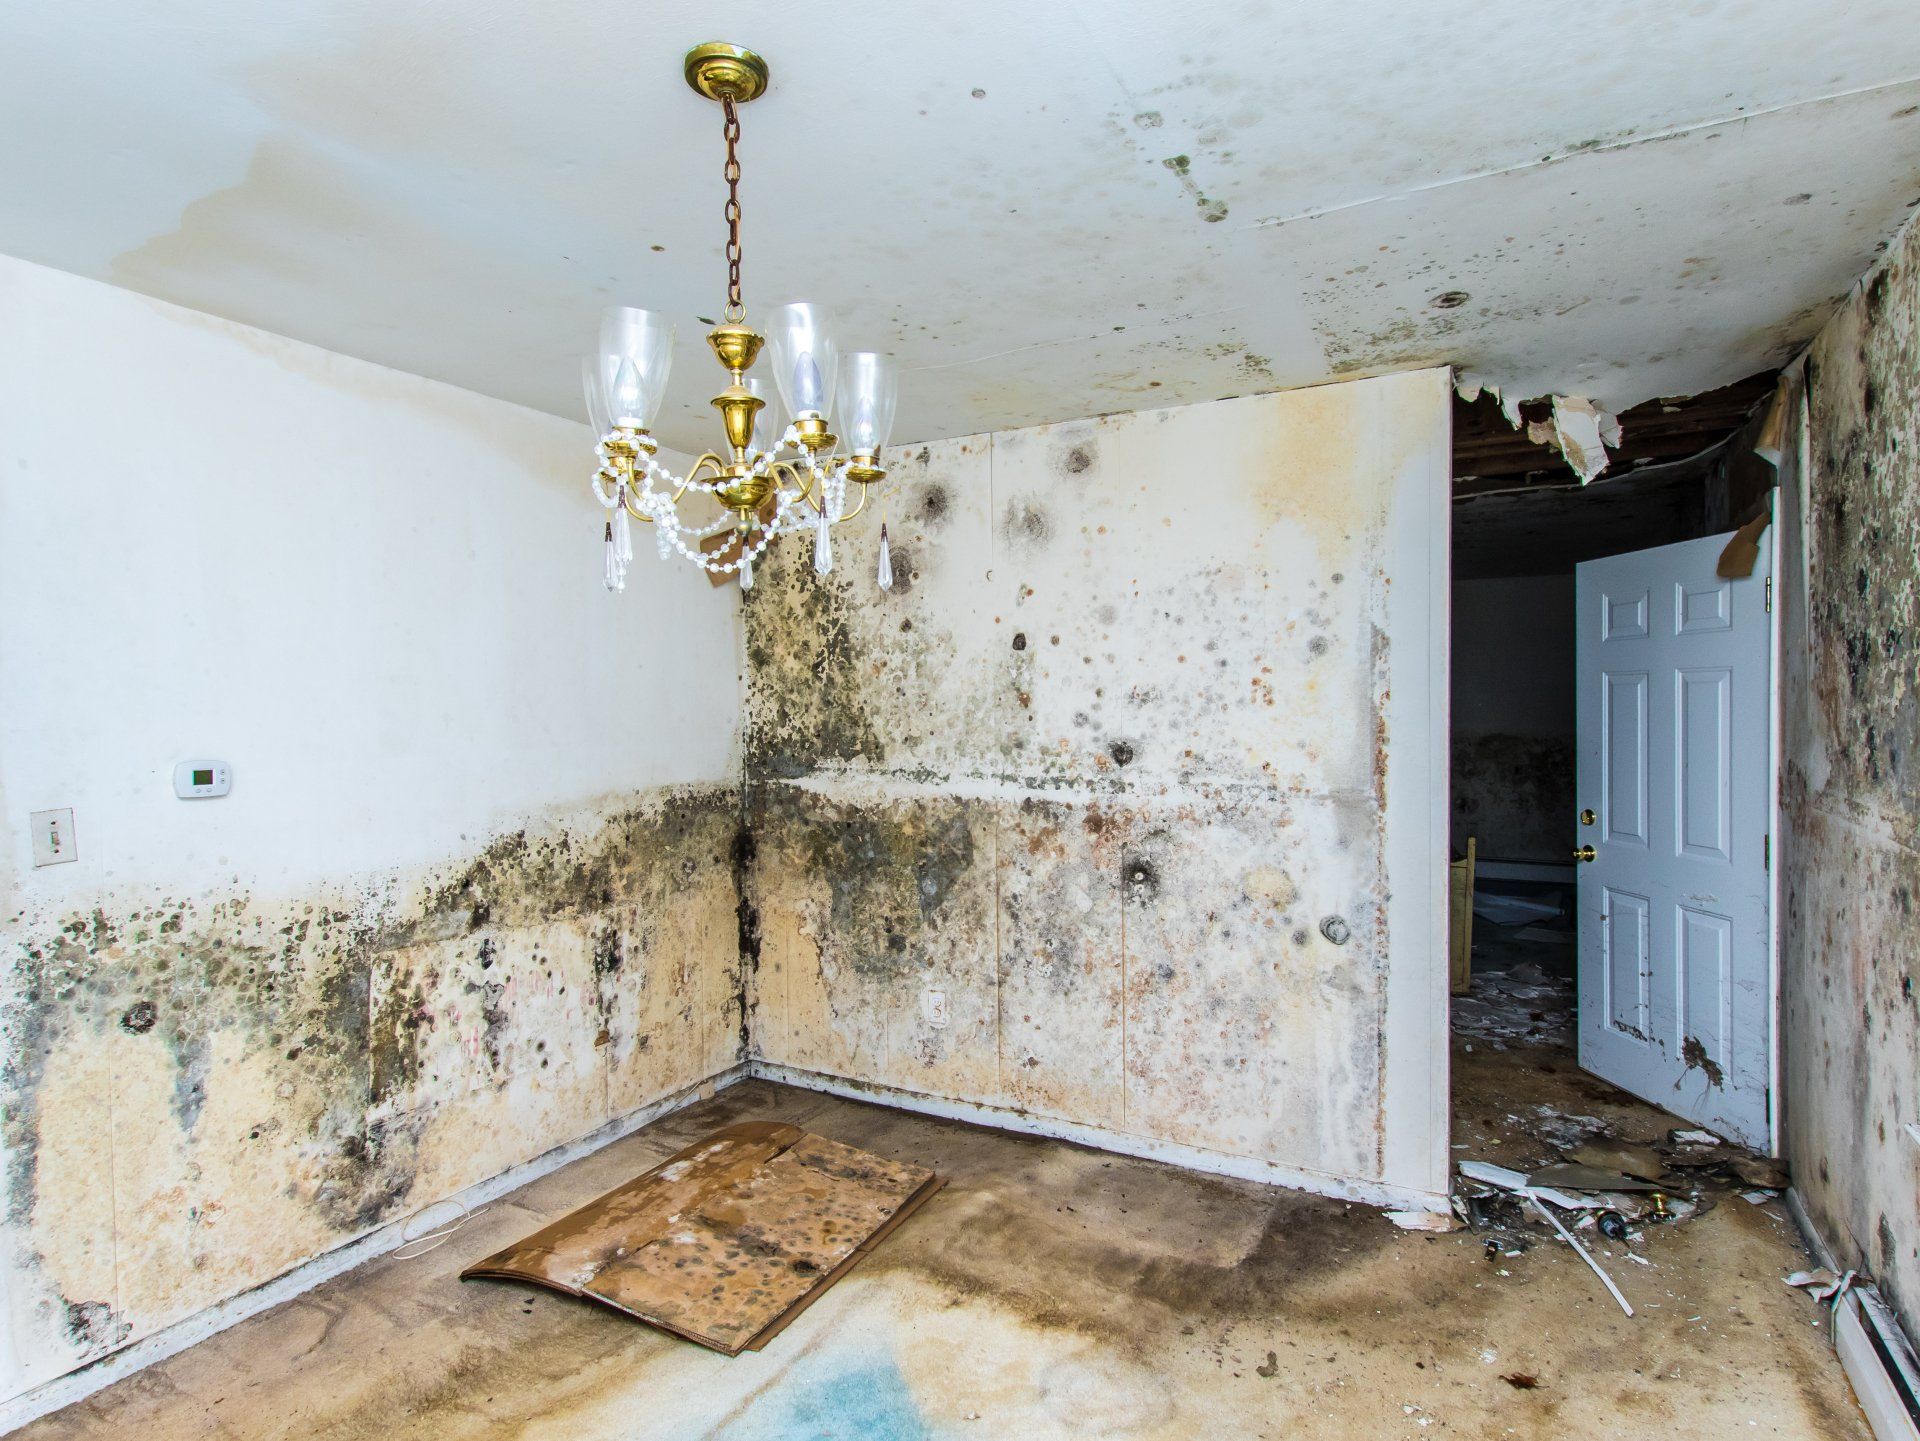 Water Damage Restoration in Dallas and Fort Worth